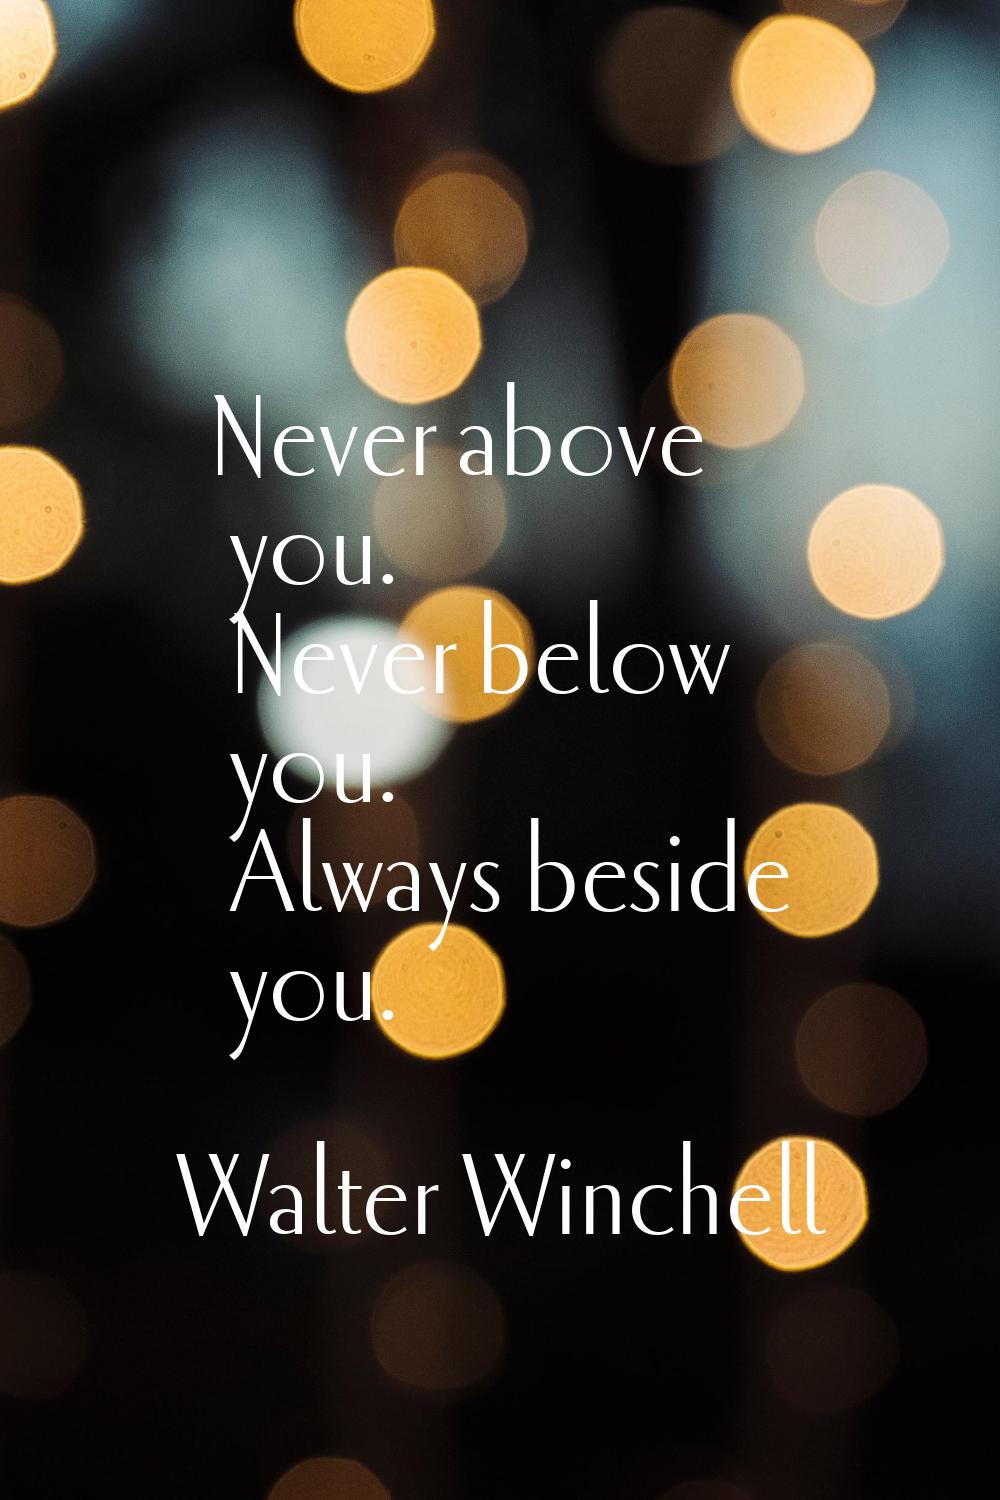 Never above you. Never below you. Always beside you.